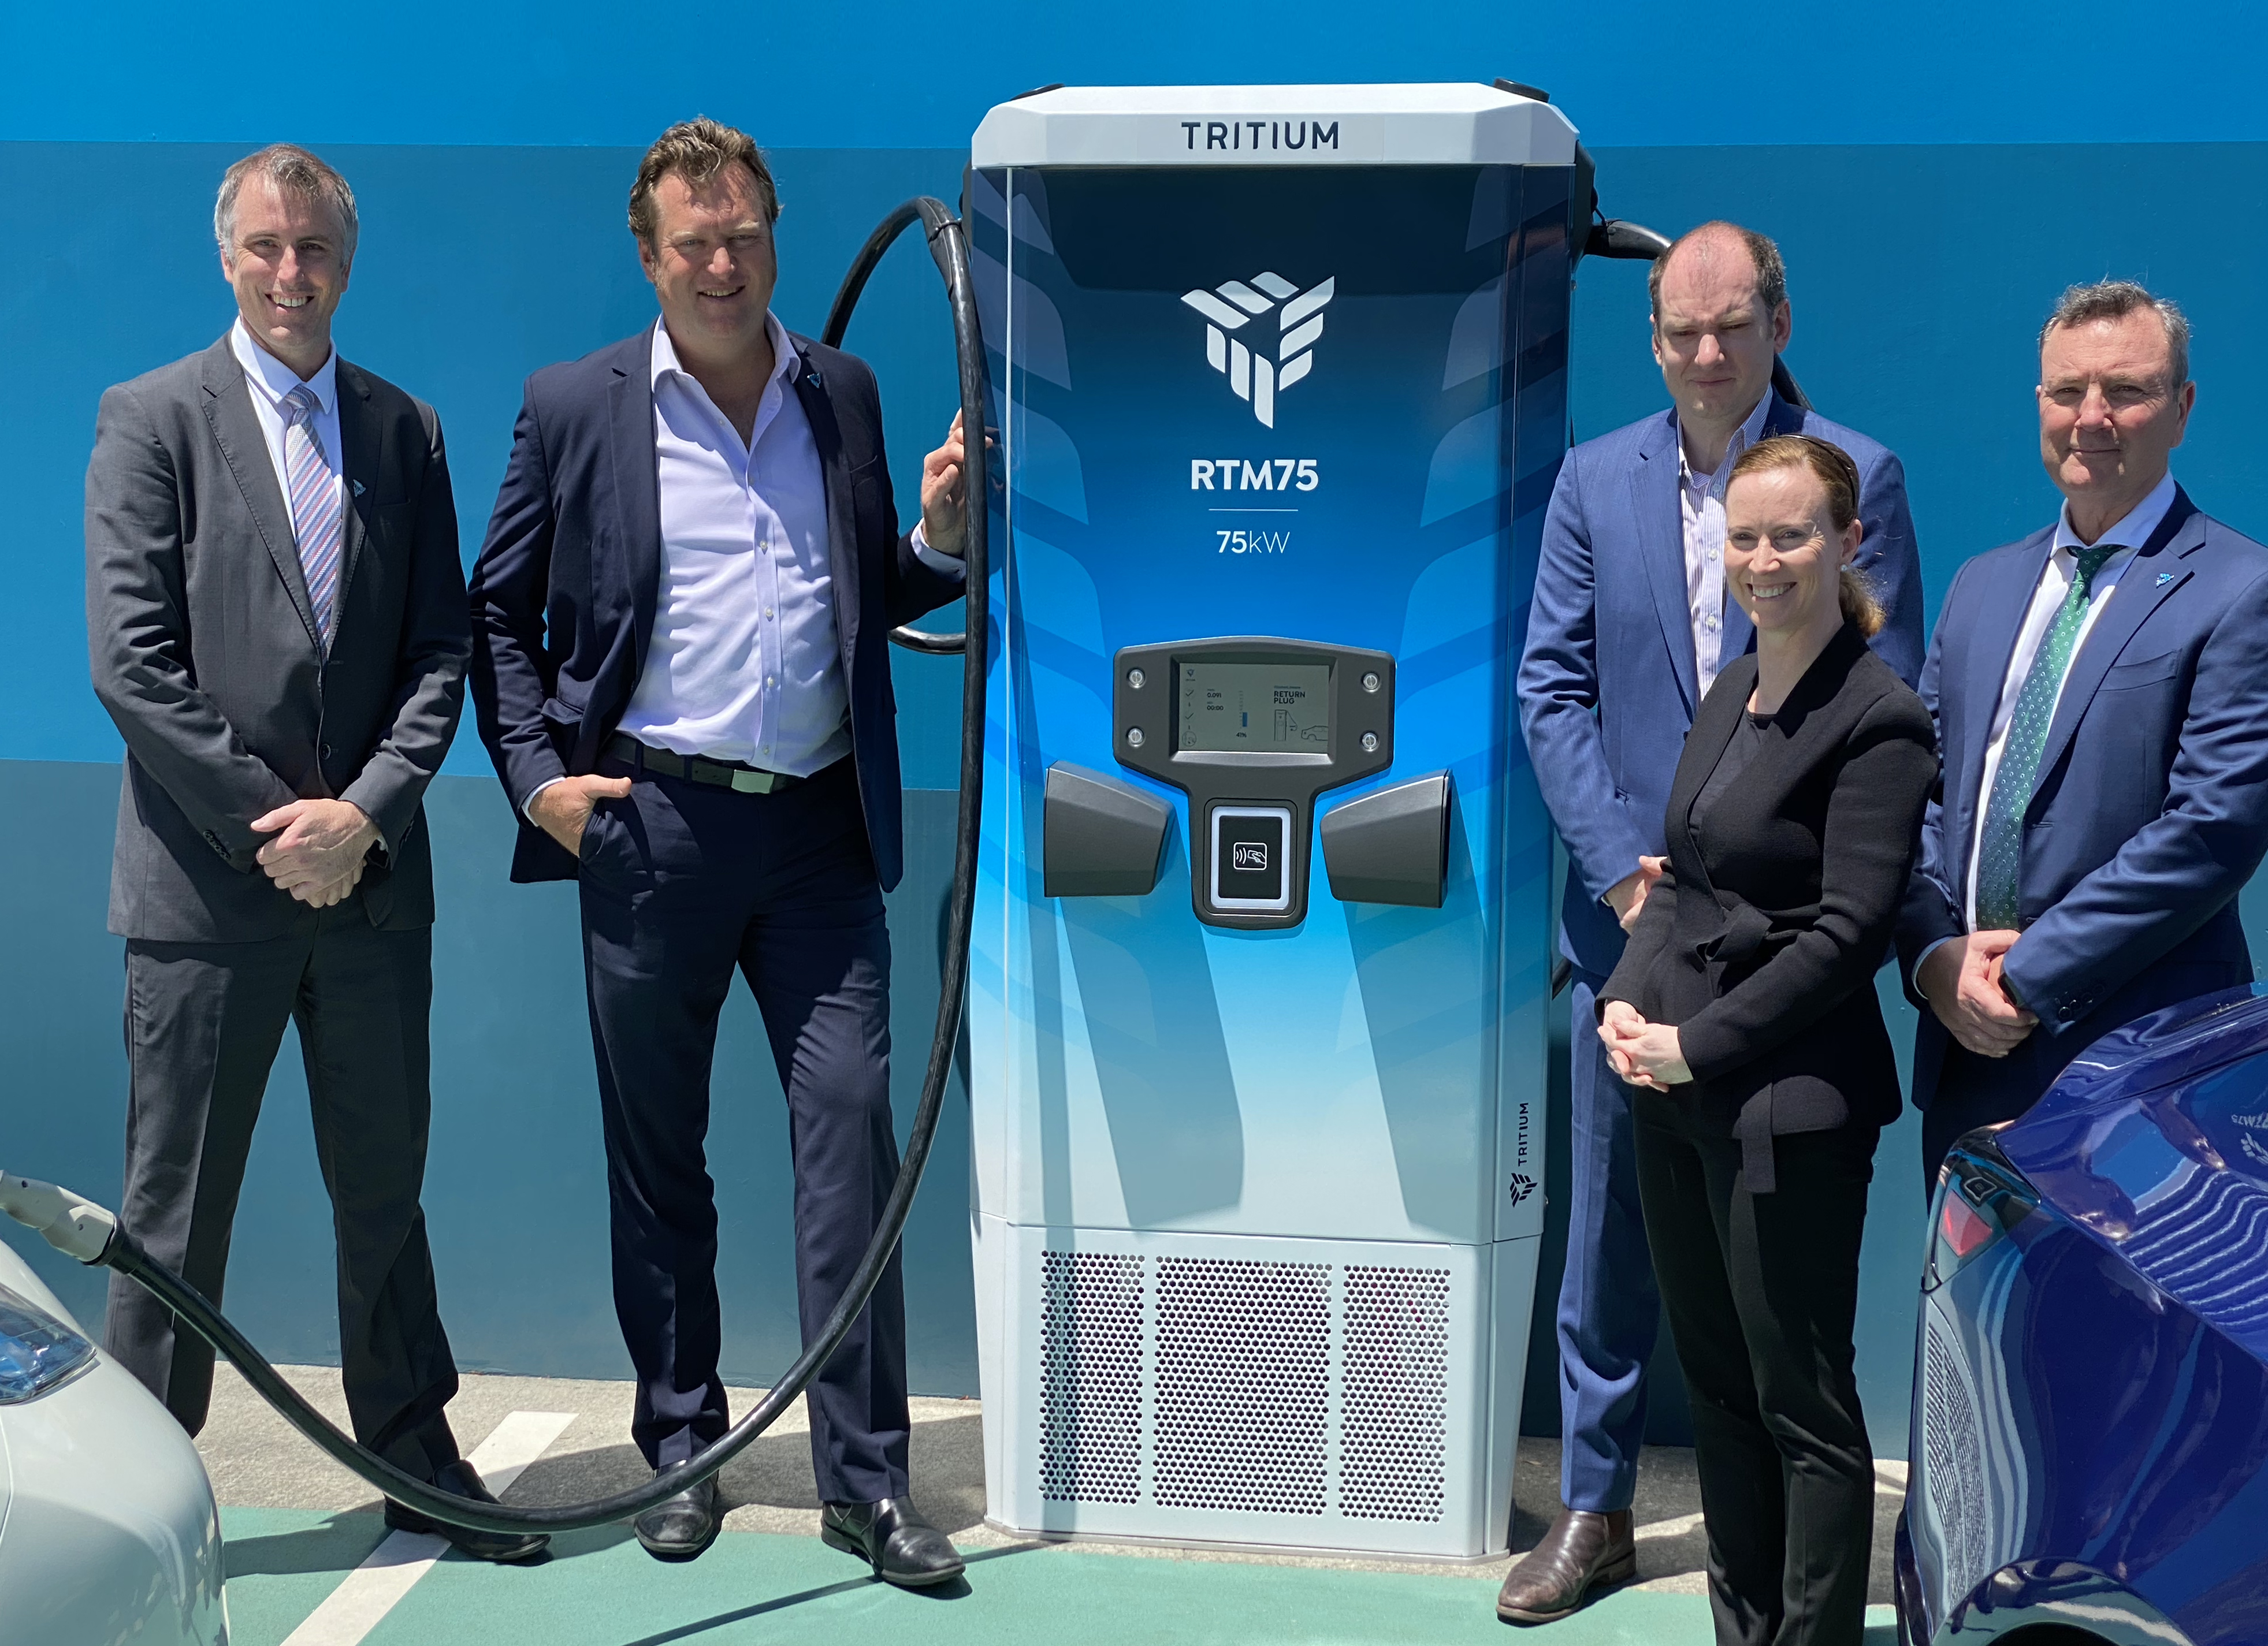   (Left to right) David Finn, chief growth officer and founder; David Toomey, chief revenue officer; James Kennedy, chief technology officer and founder; Jane Hunter, chief executive officer; and Michael Hipwood, chief financial officer (Credit: Tritium)